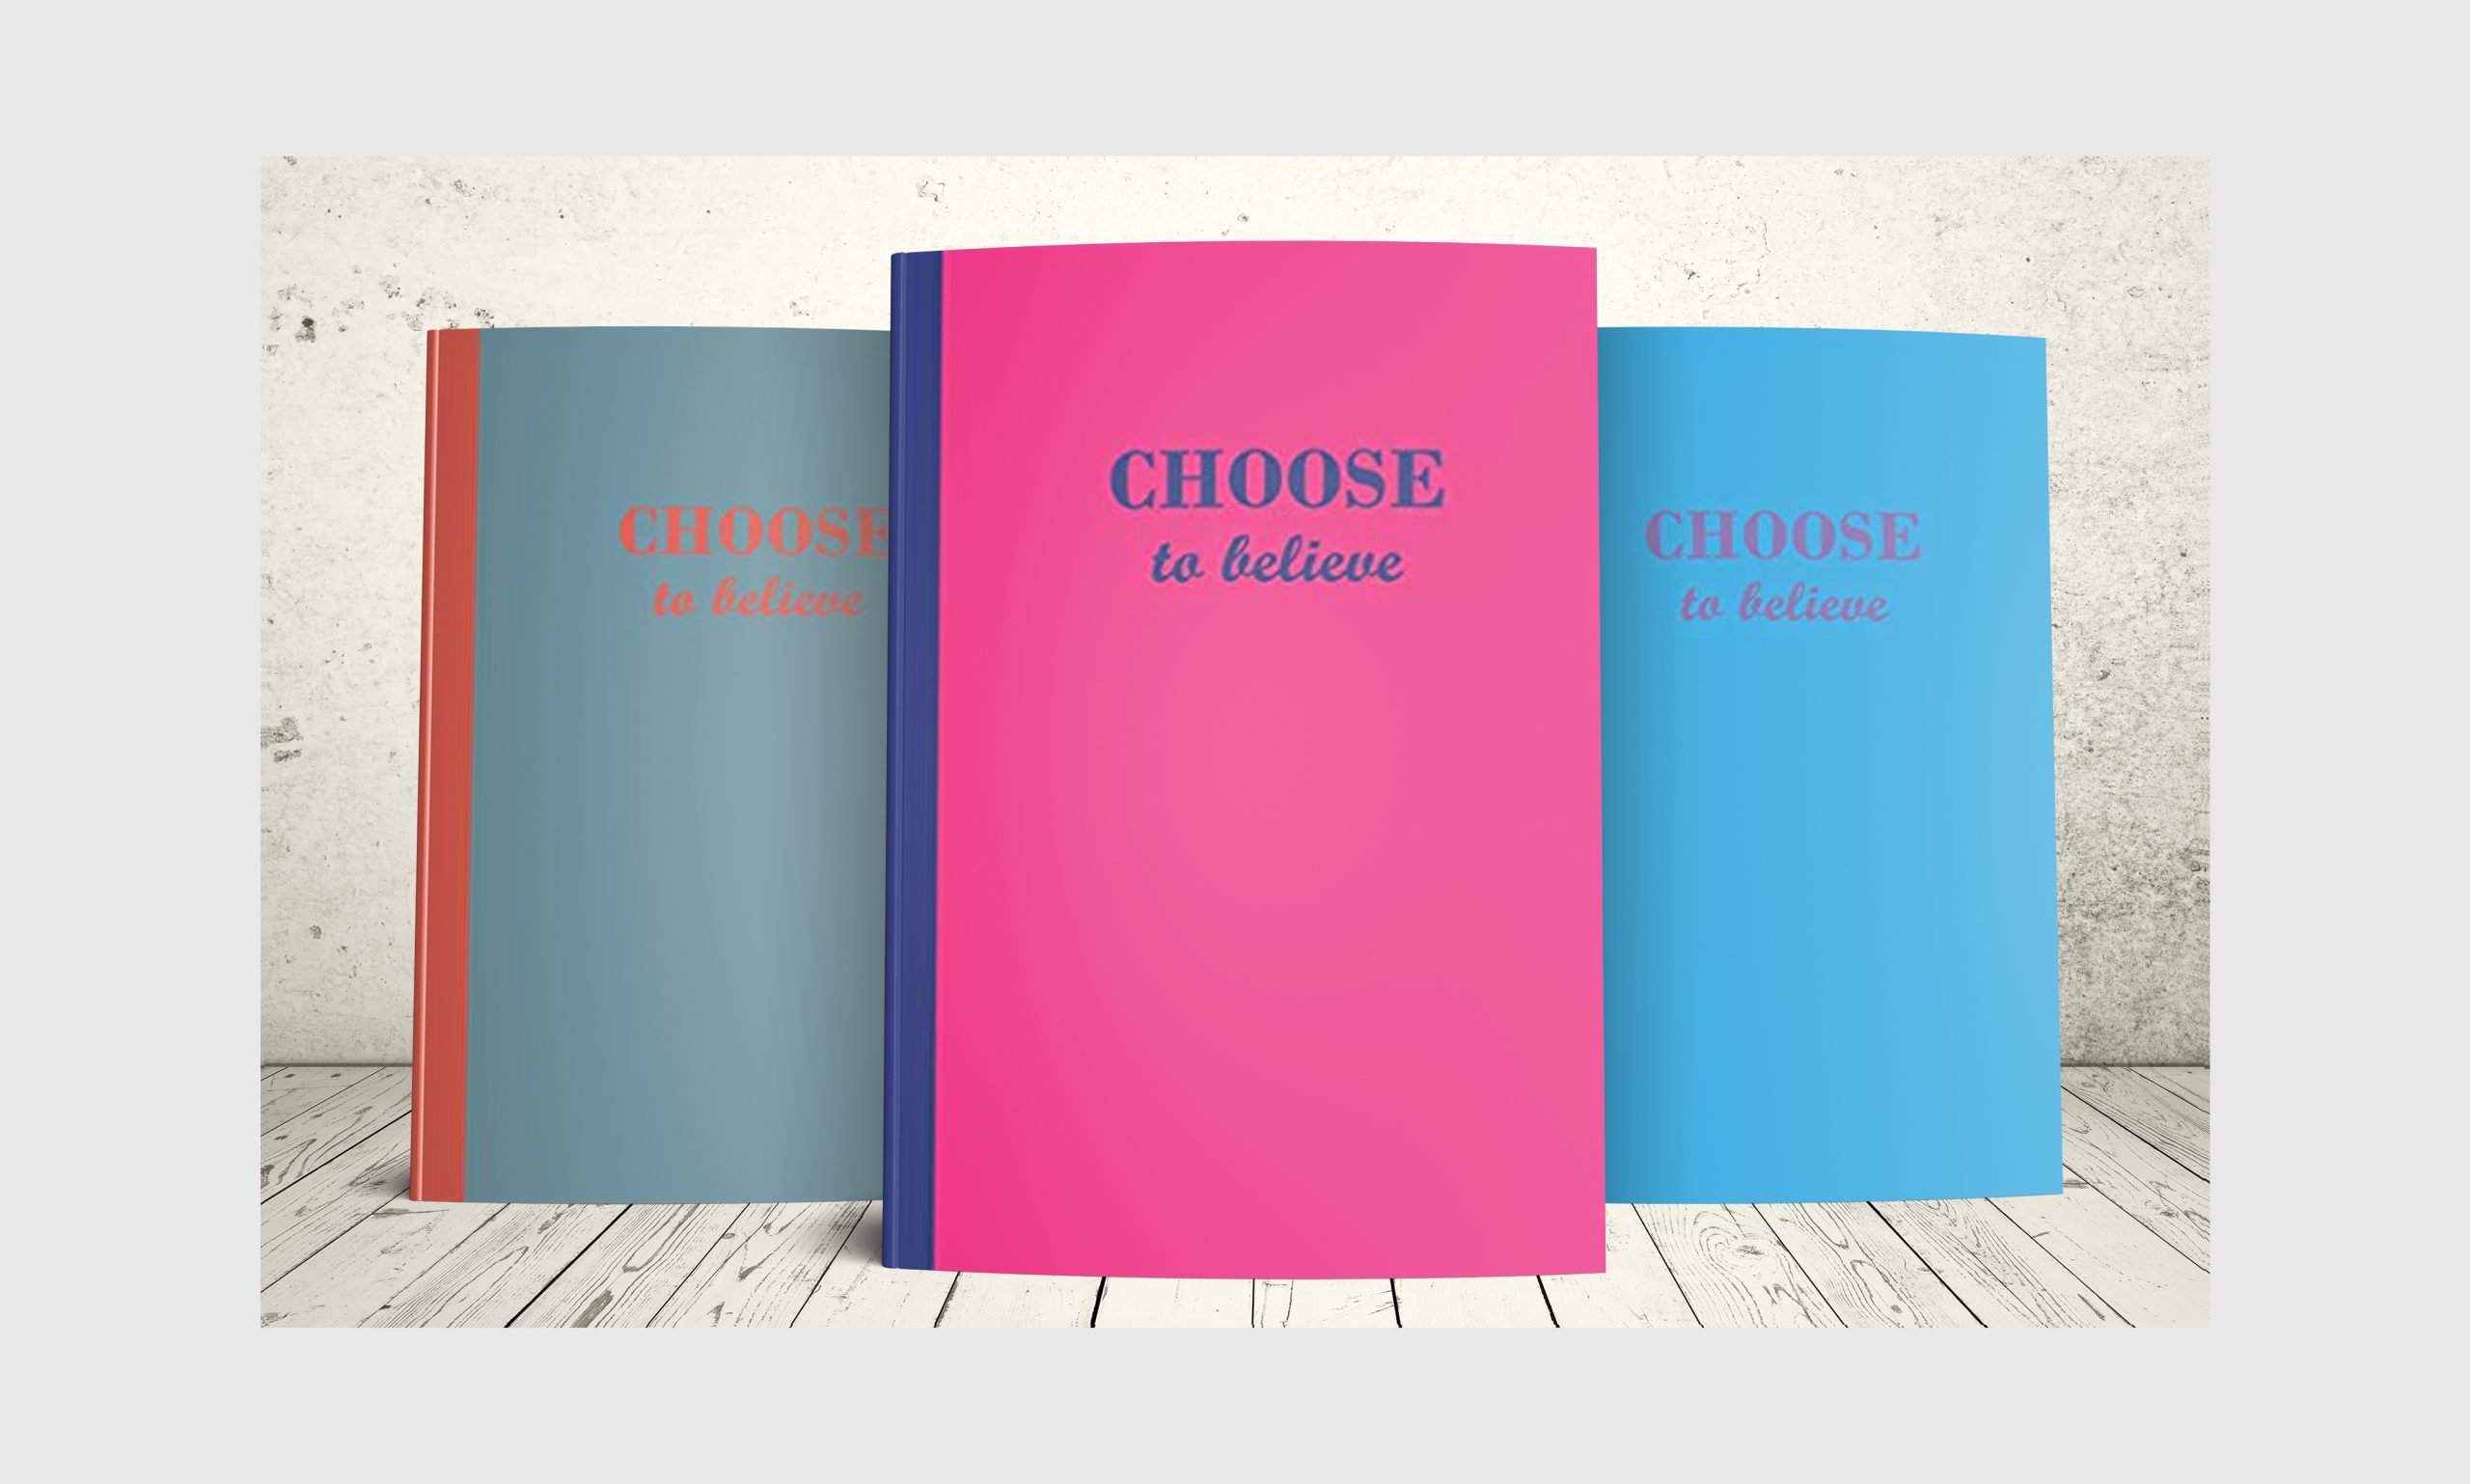 Three Choose to believe journals with covers in blue and orange, pink and blue and blue and purple.